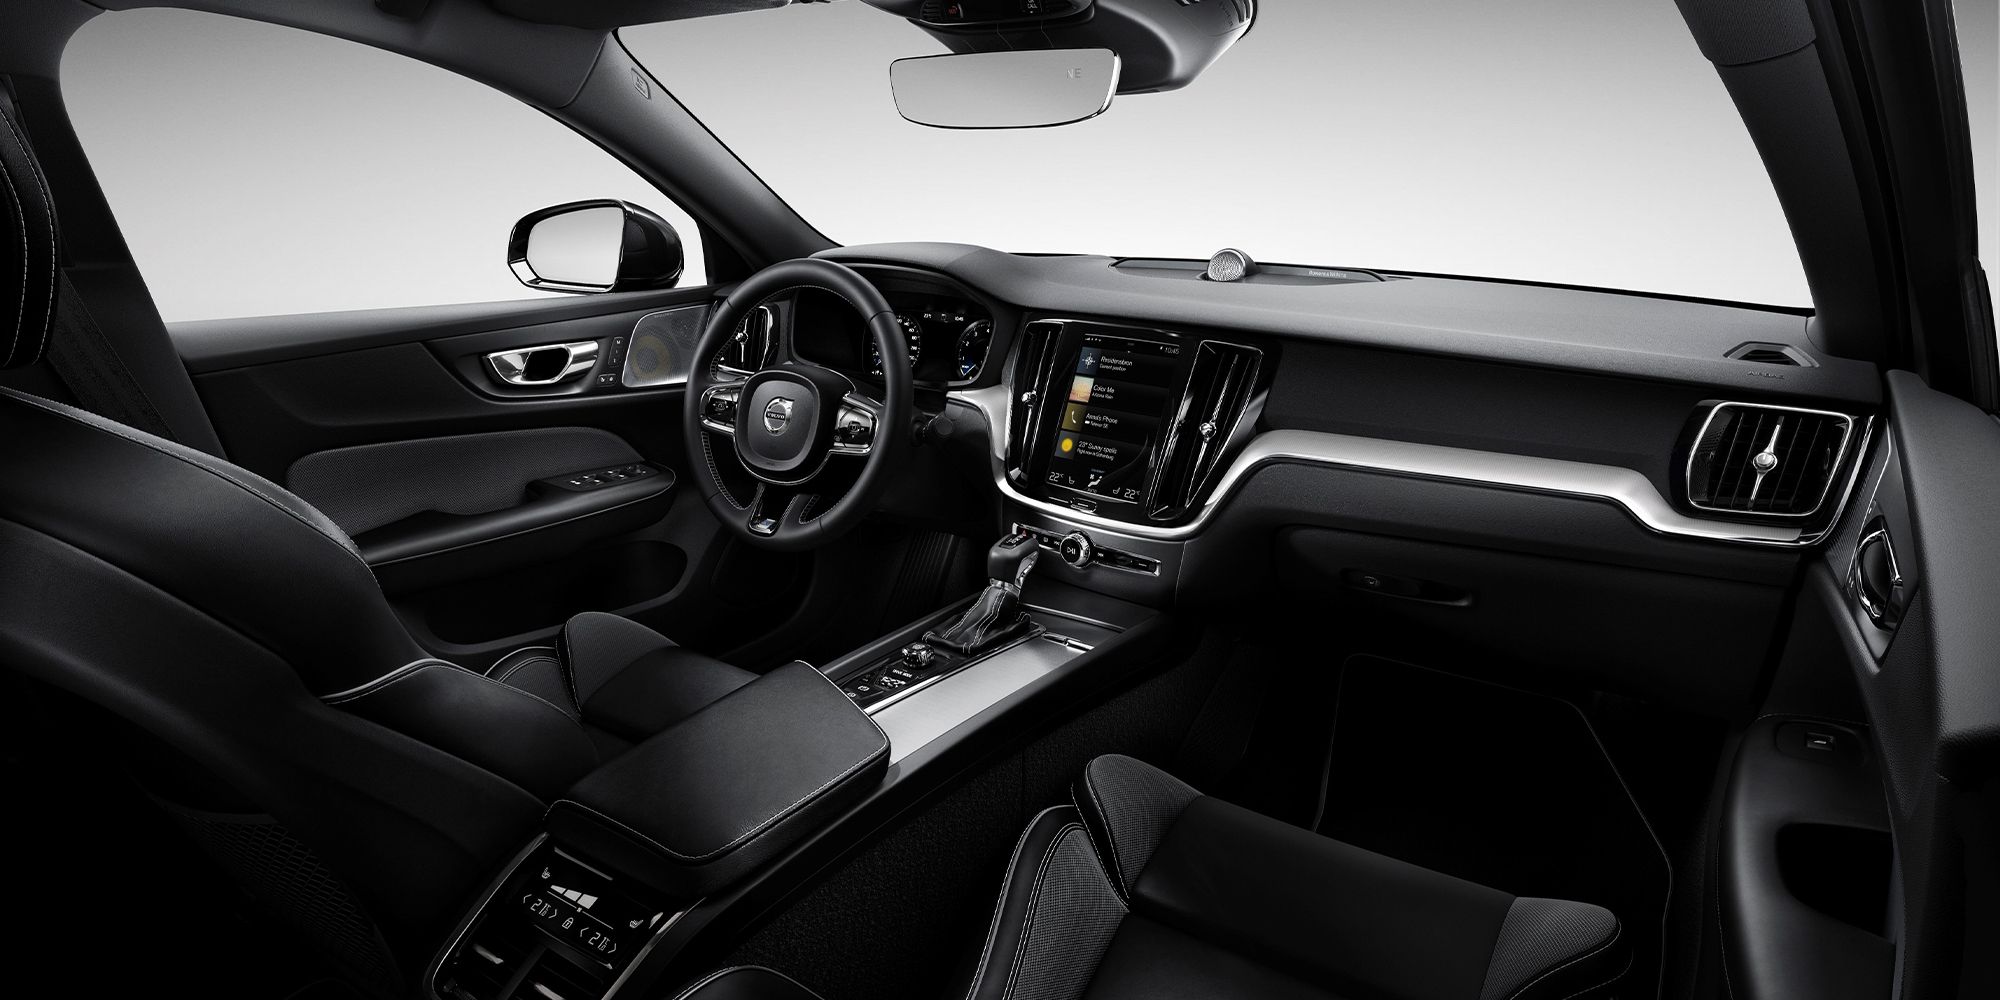 The interior of the S60, trimmed in black